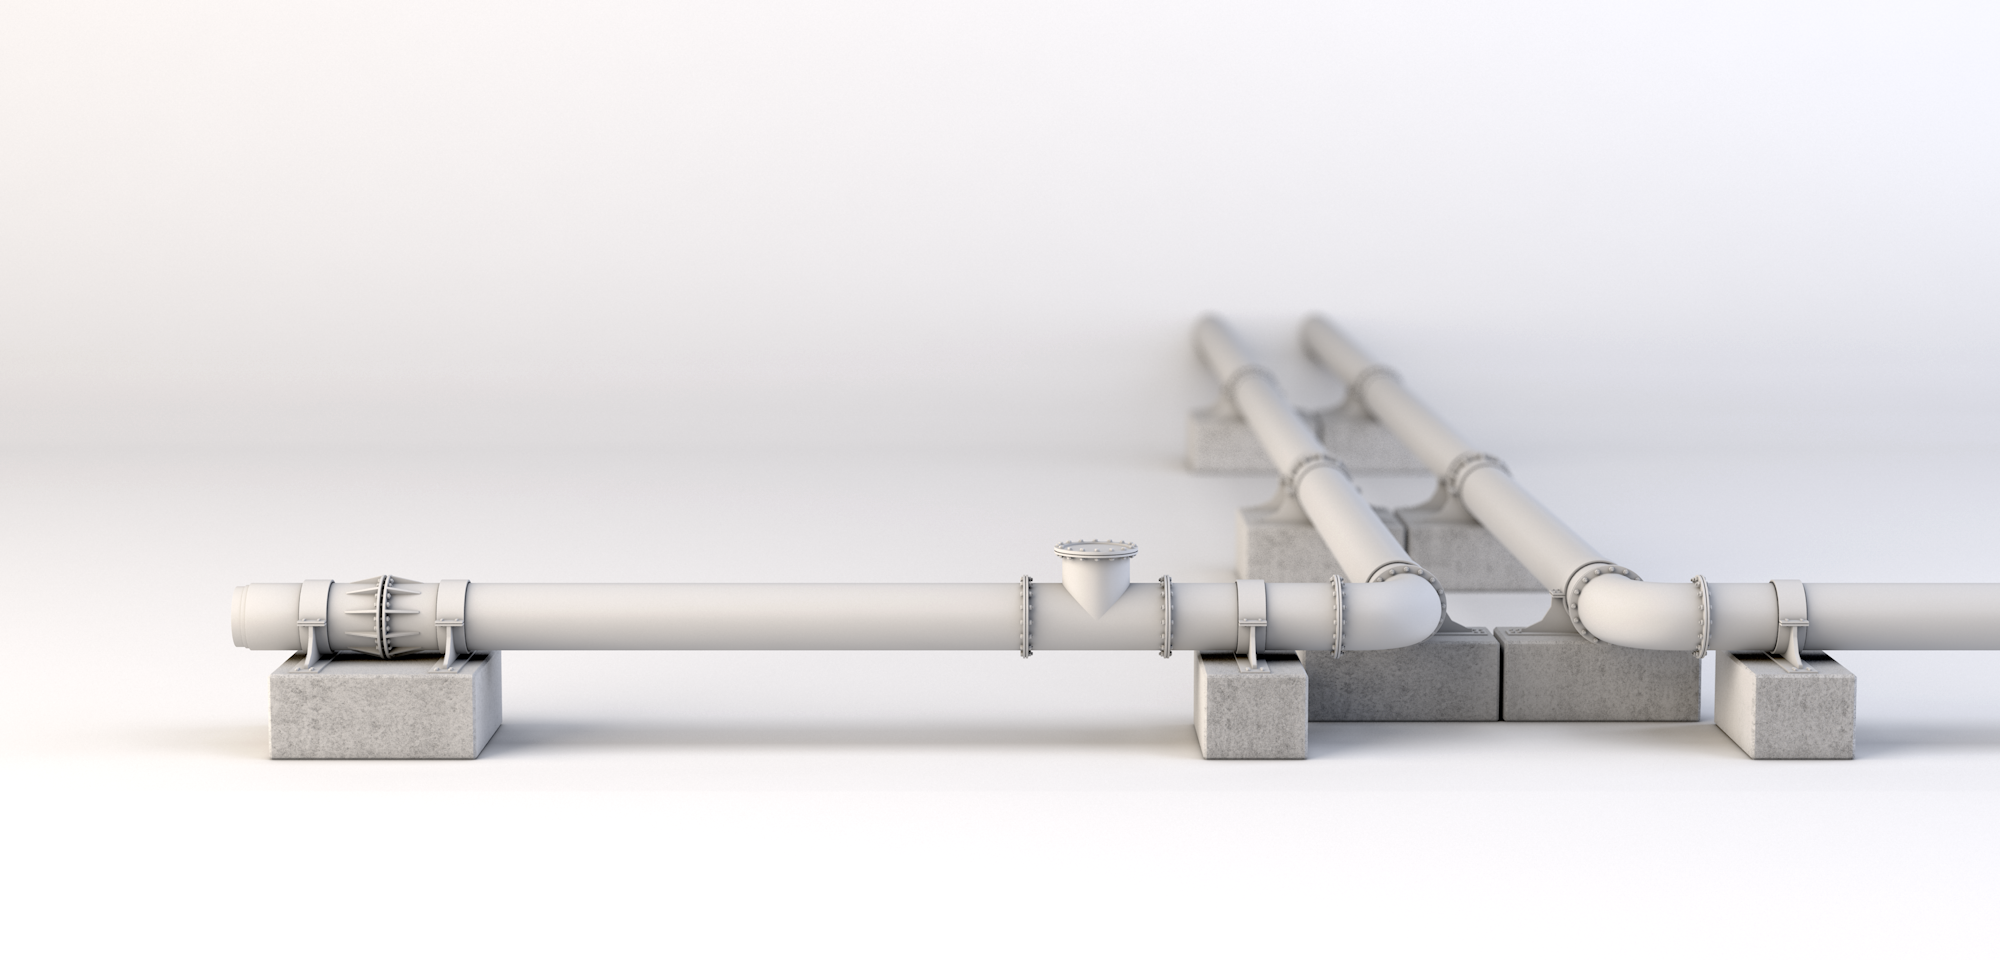 Oil pipeline rendering fitted with Fabreeka expansion bearings